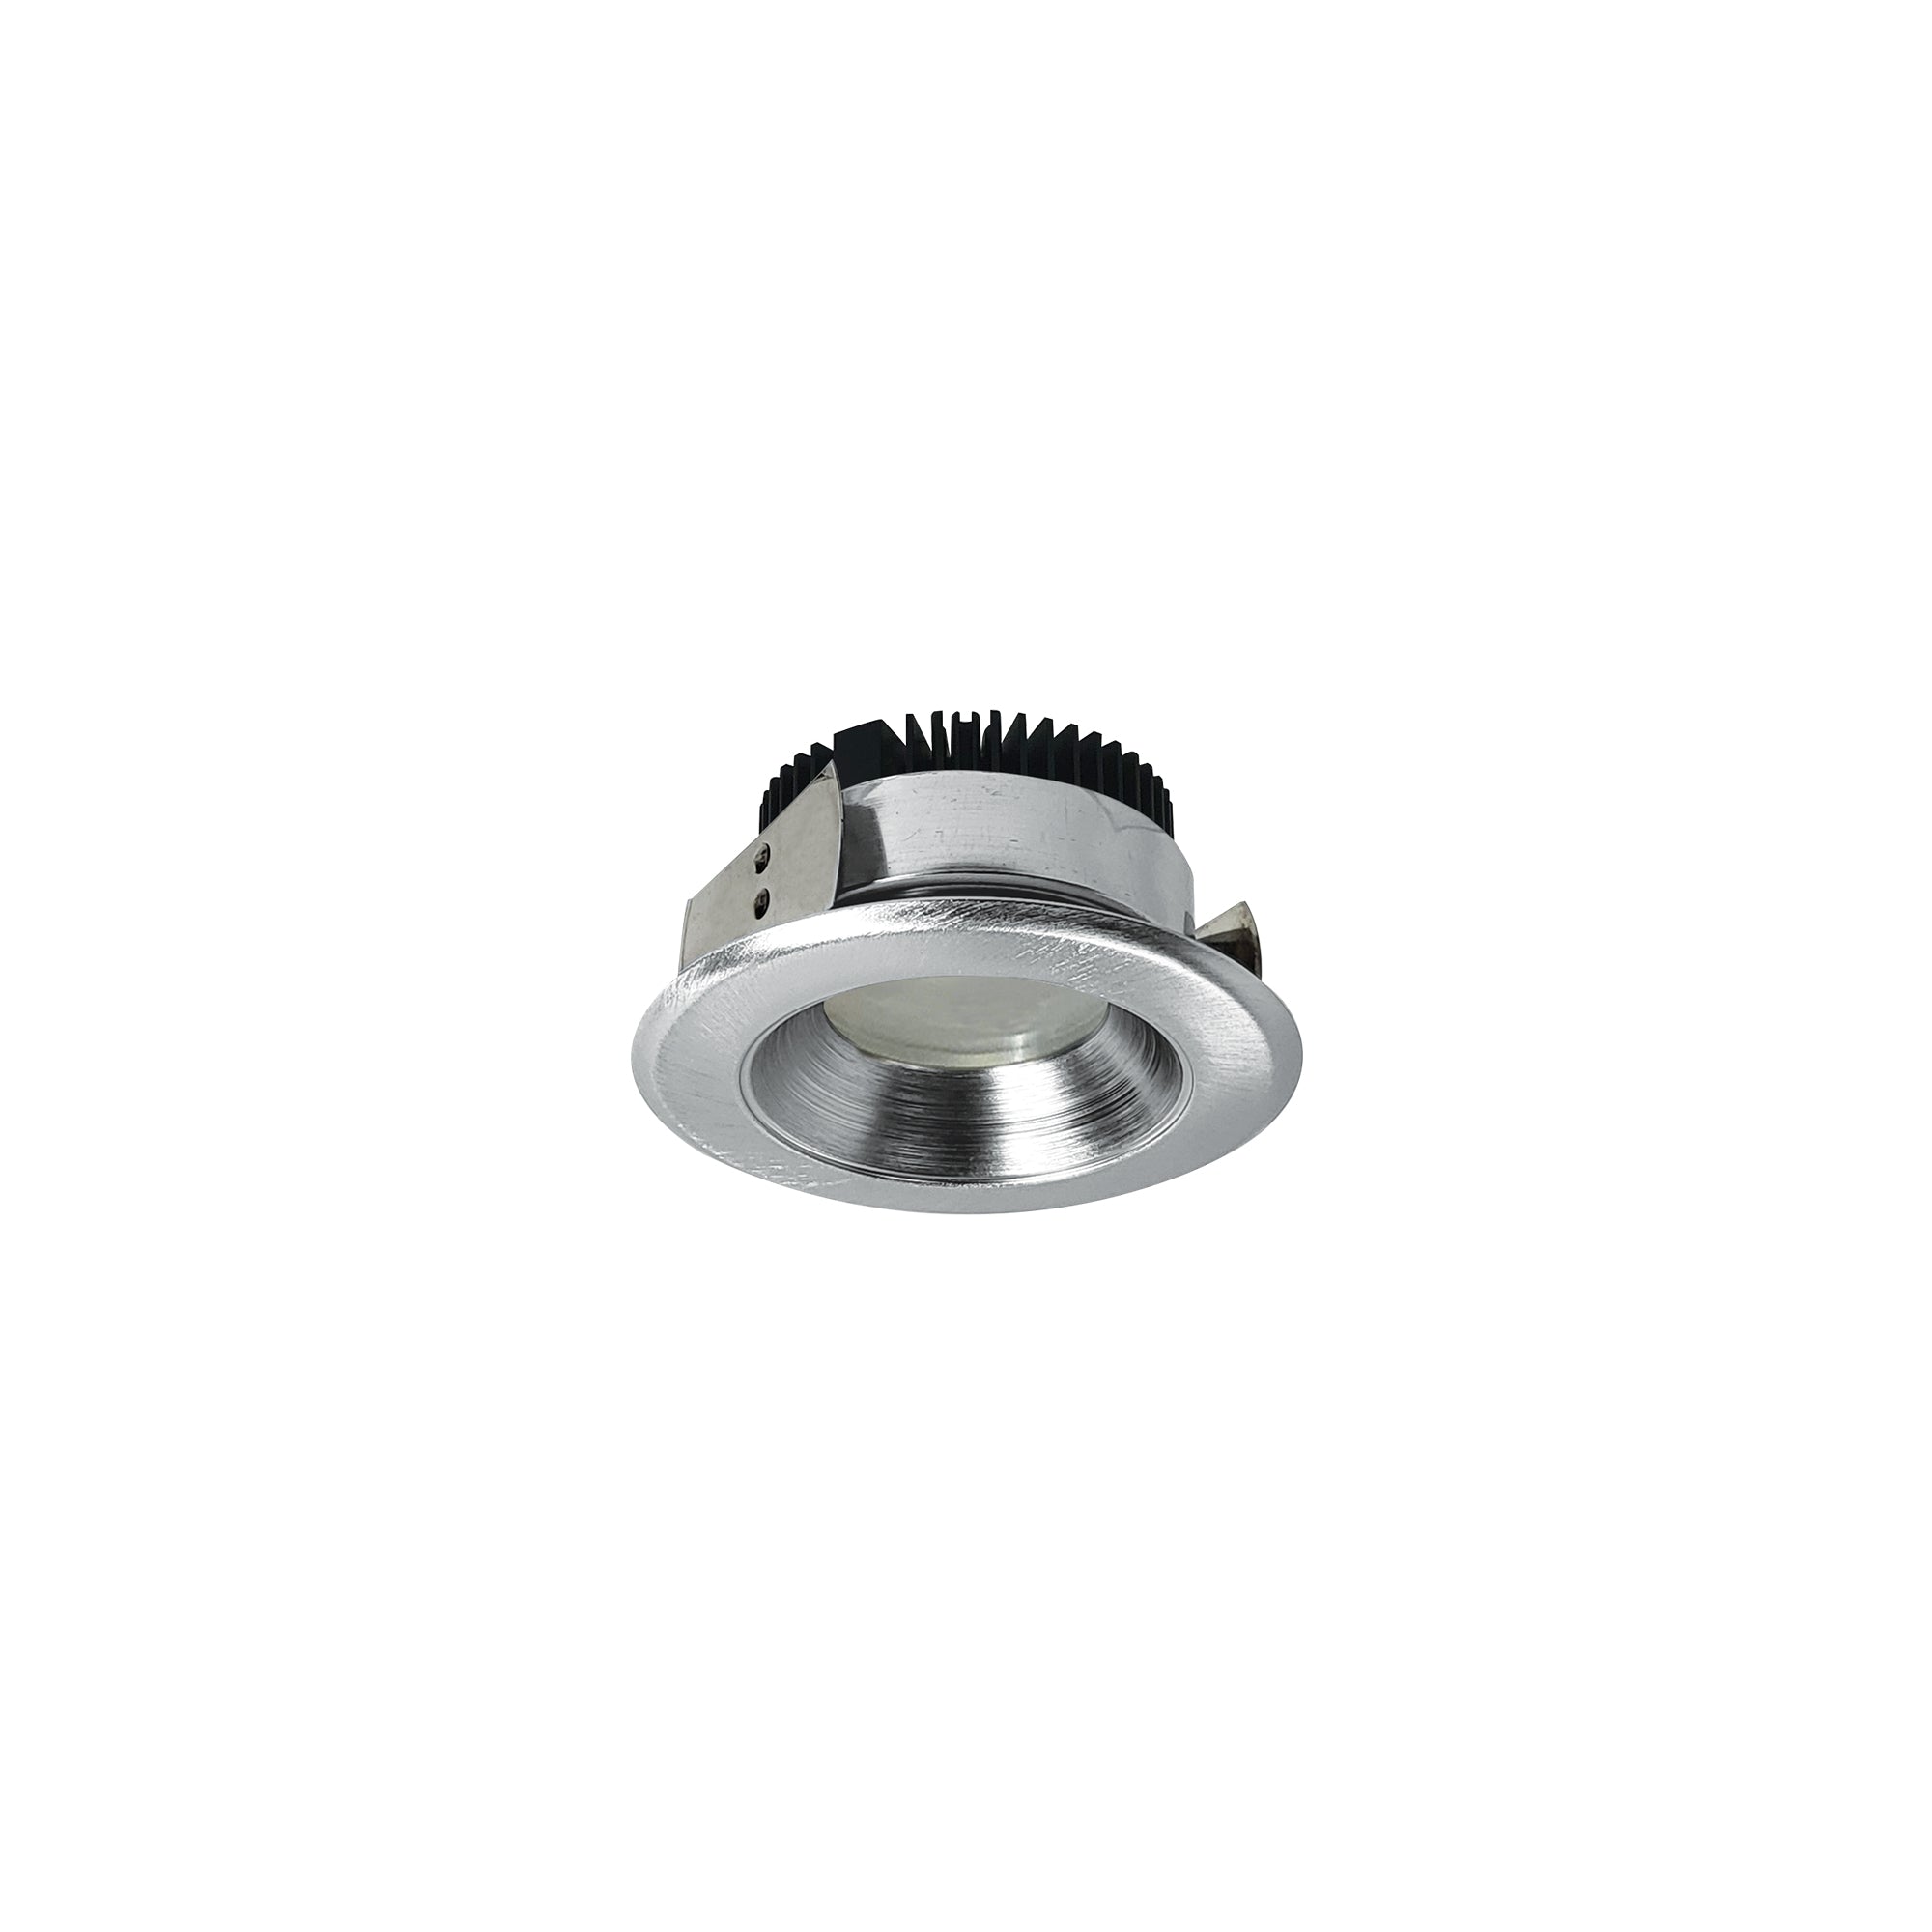 Nora Lighting NRM2-411L0930FNN - Recessed - 4 Inch Marquise II Round Reflector, 900lm, 3000K, Flood, Natural Metal